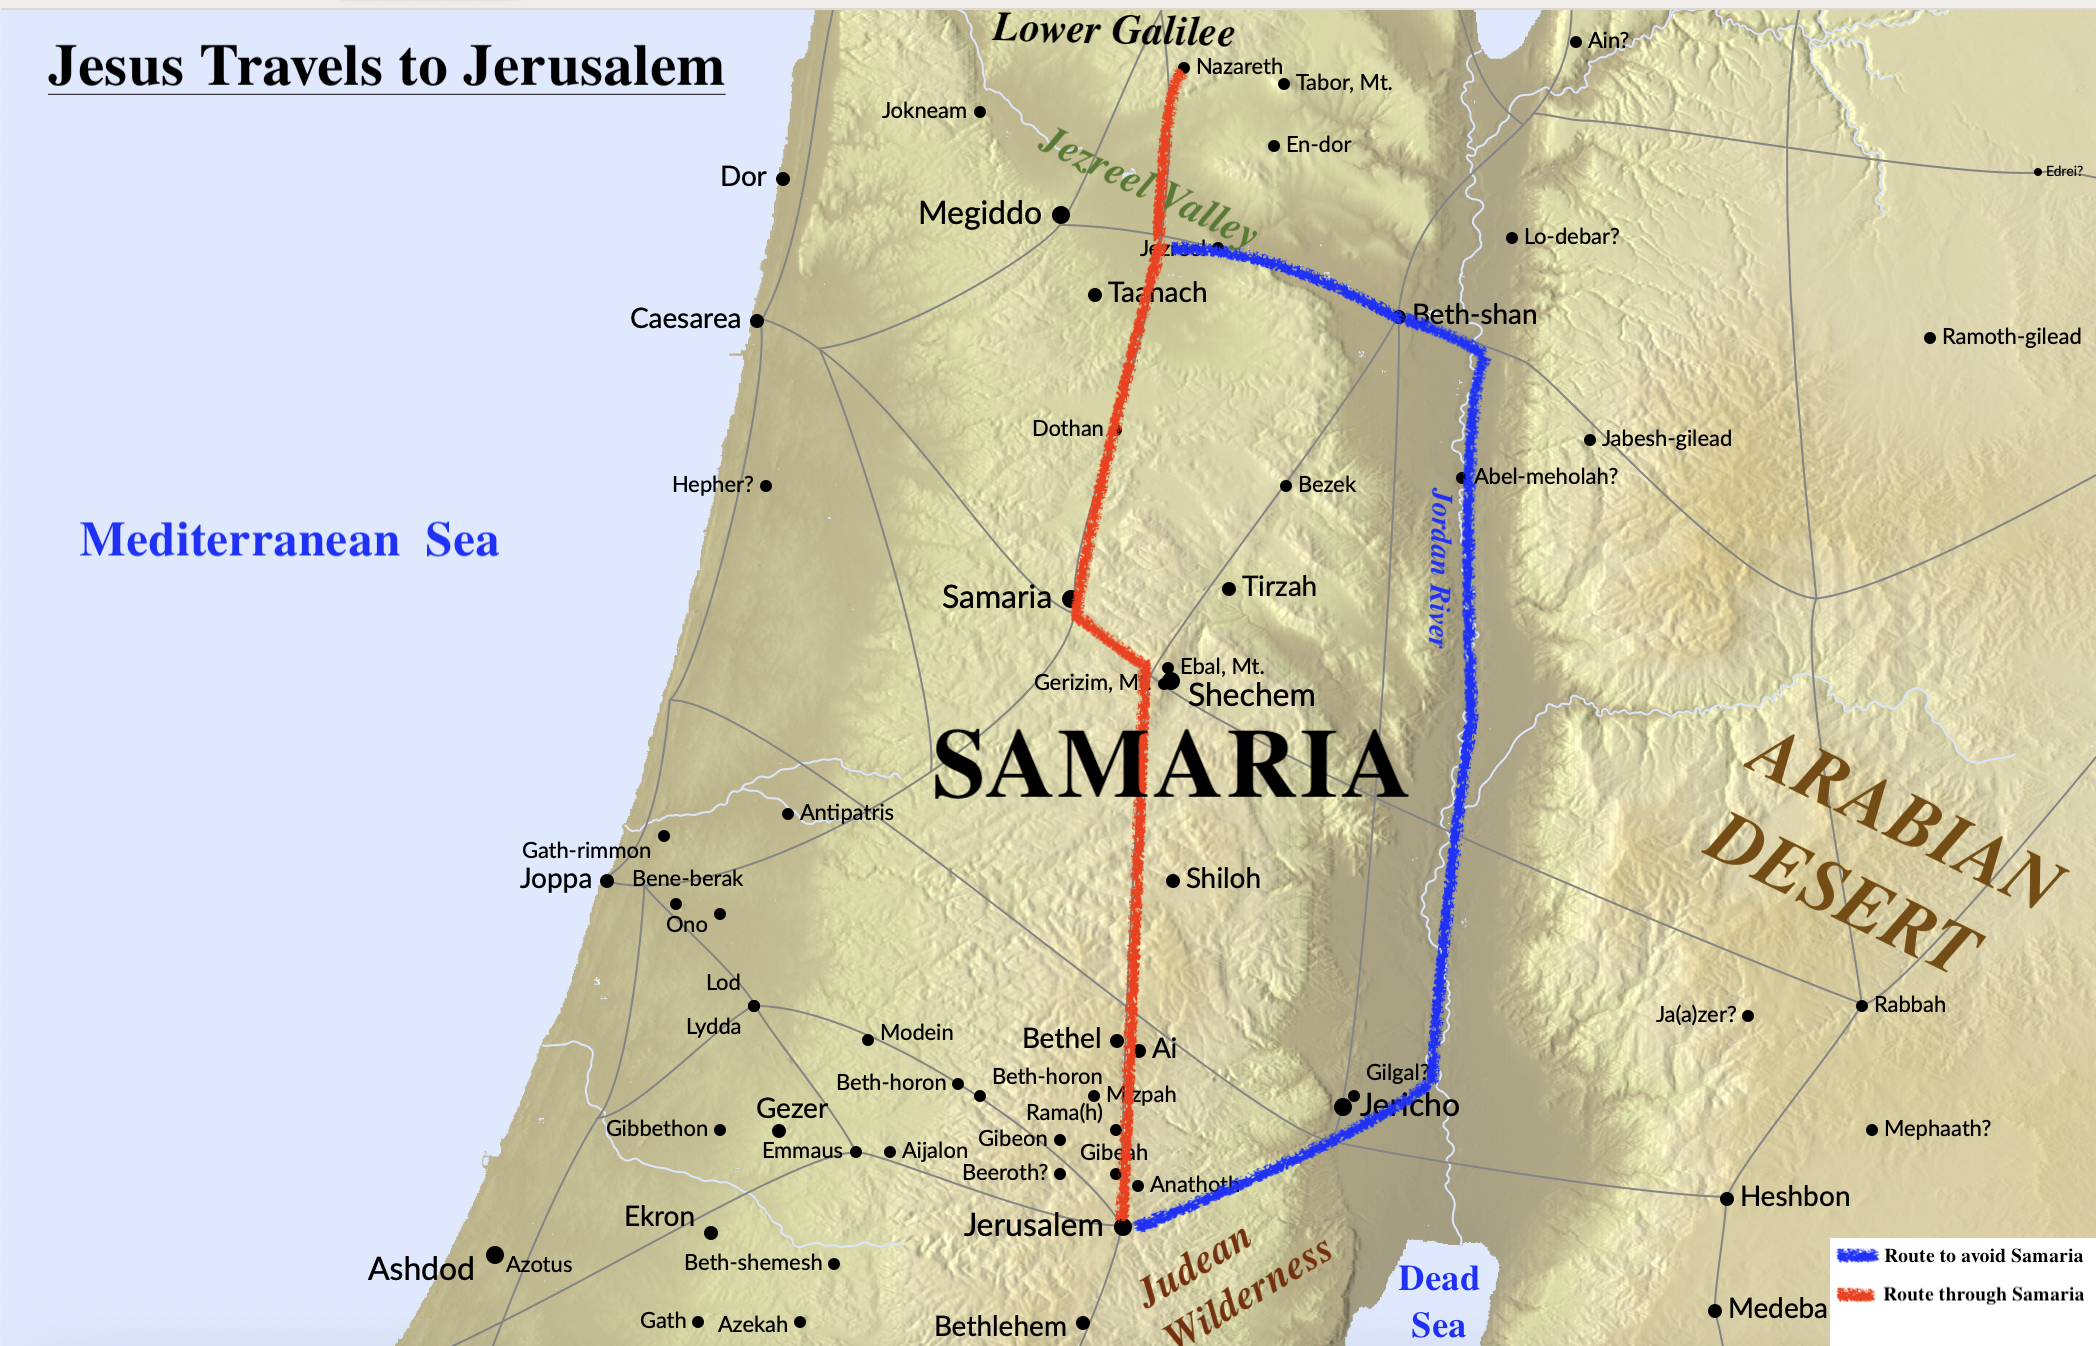 The route Jesus would have taken traveling to Jerusalem from Nazareth. 